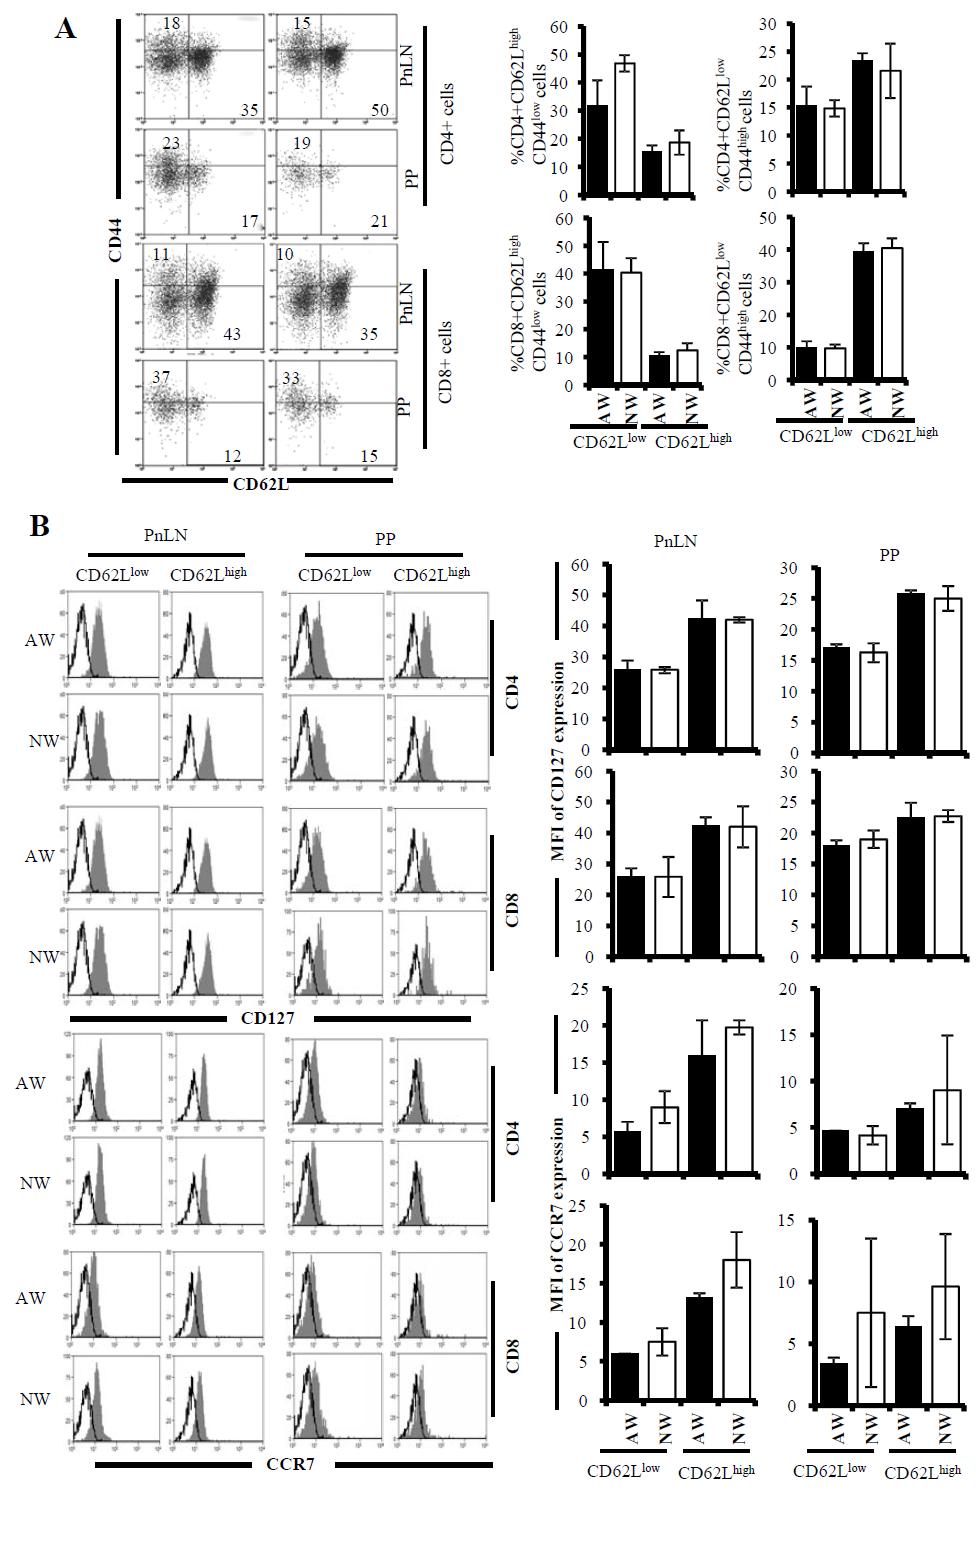 Supplementary Figure 2. AW and NW groups of mice show comparable memory T cell frequencies.